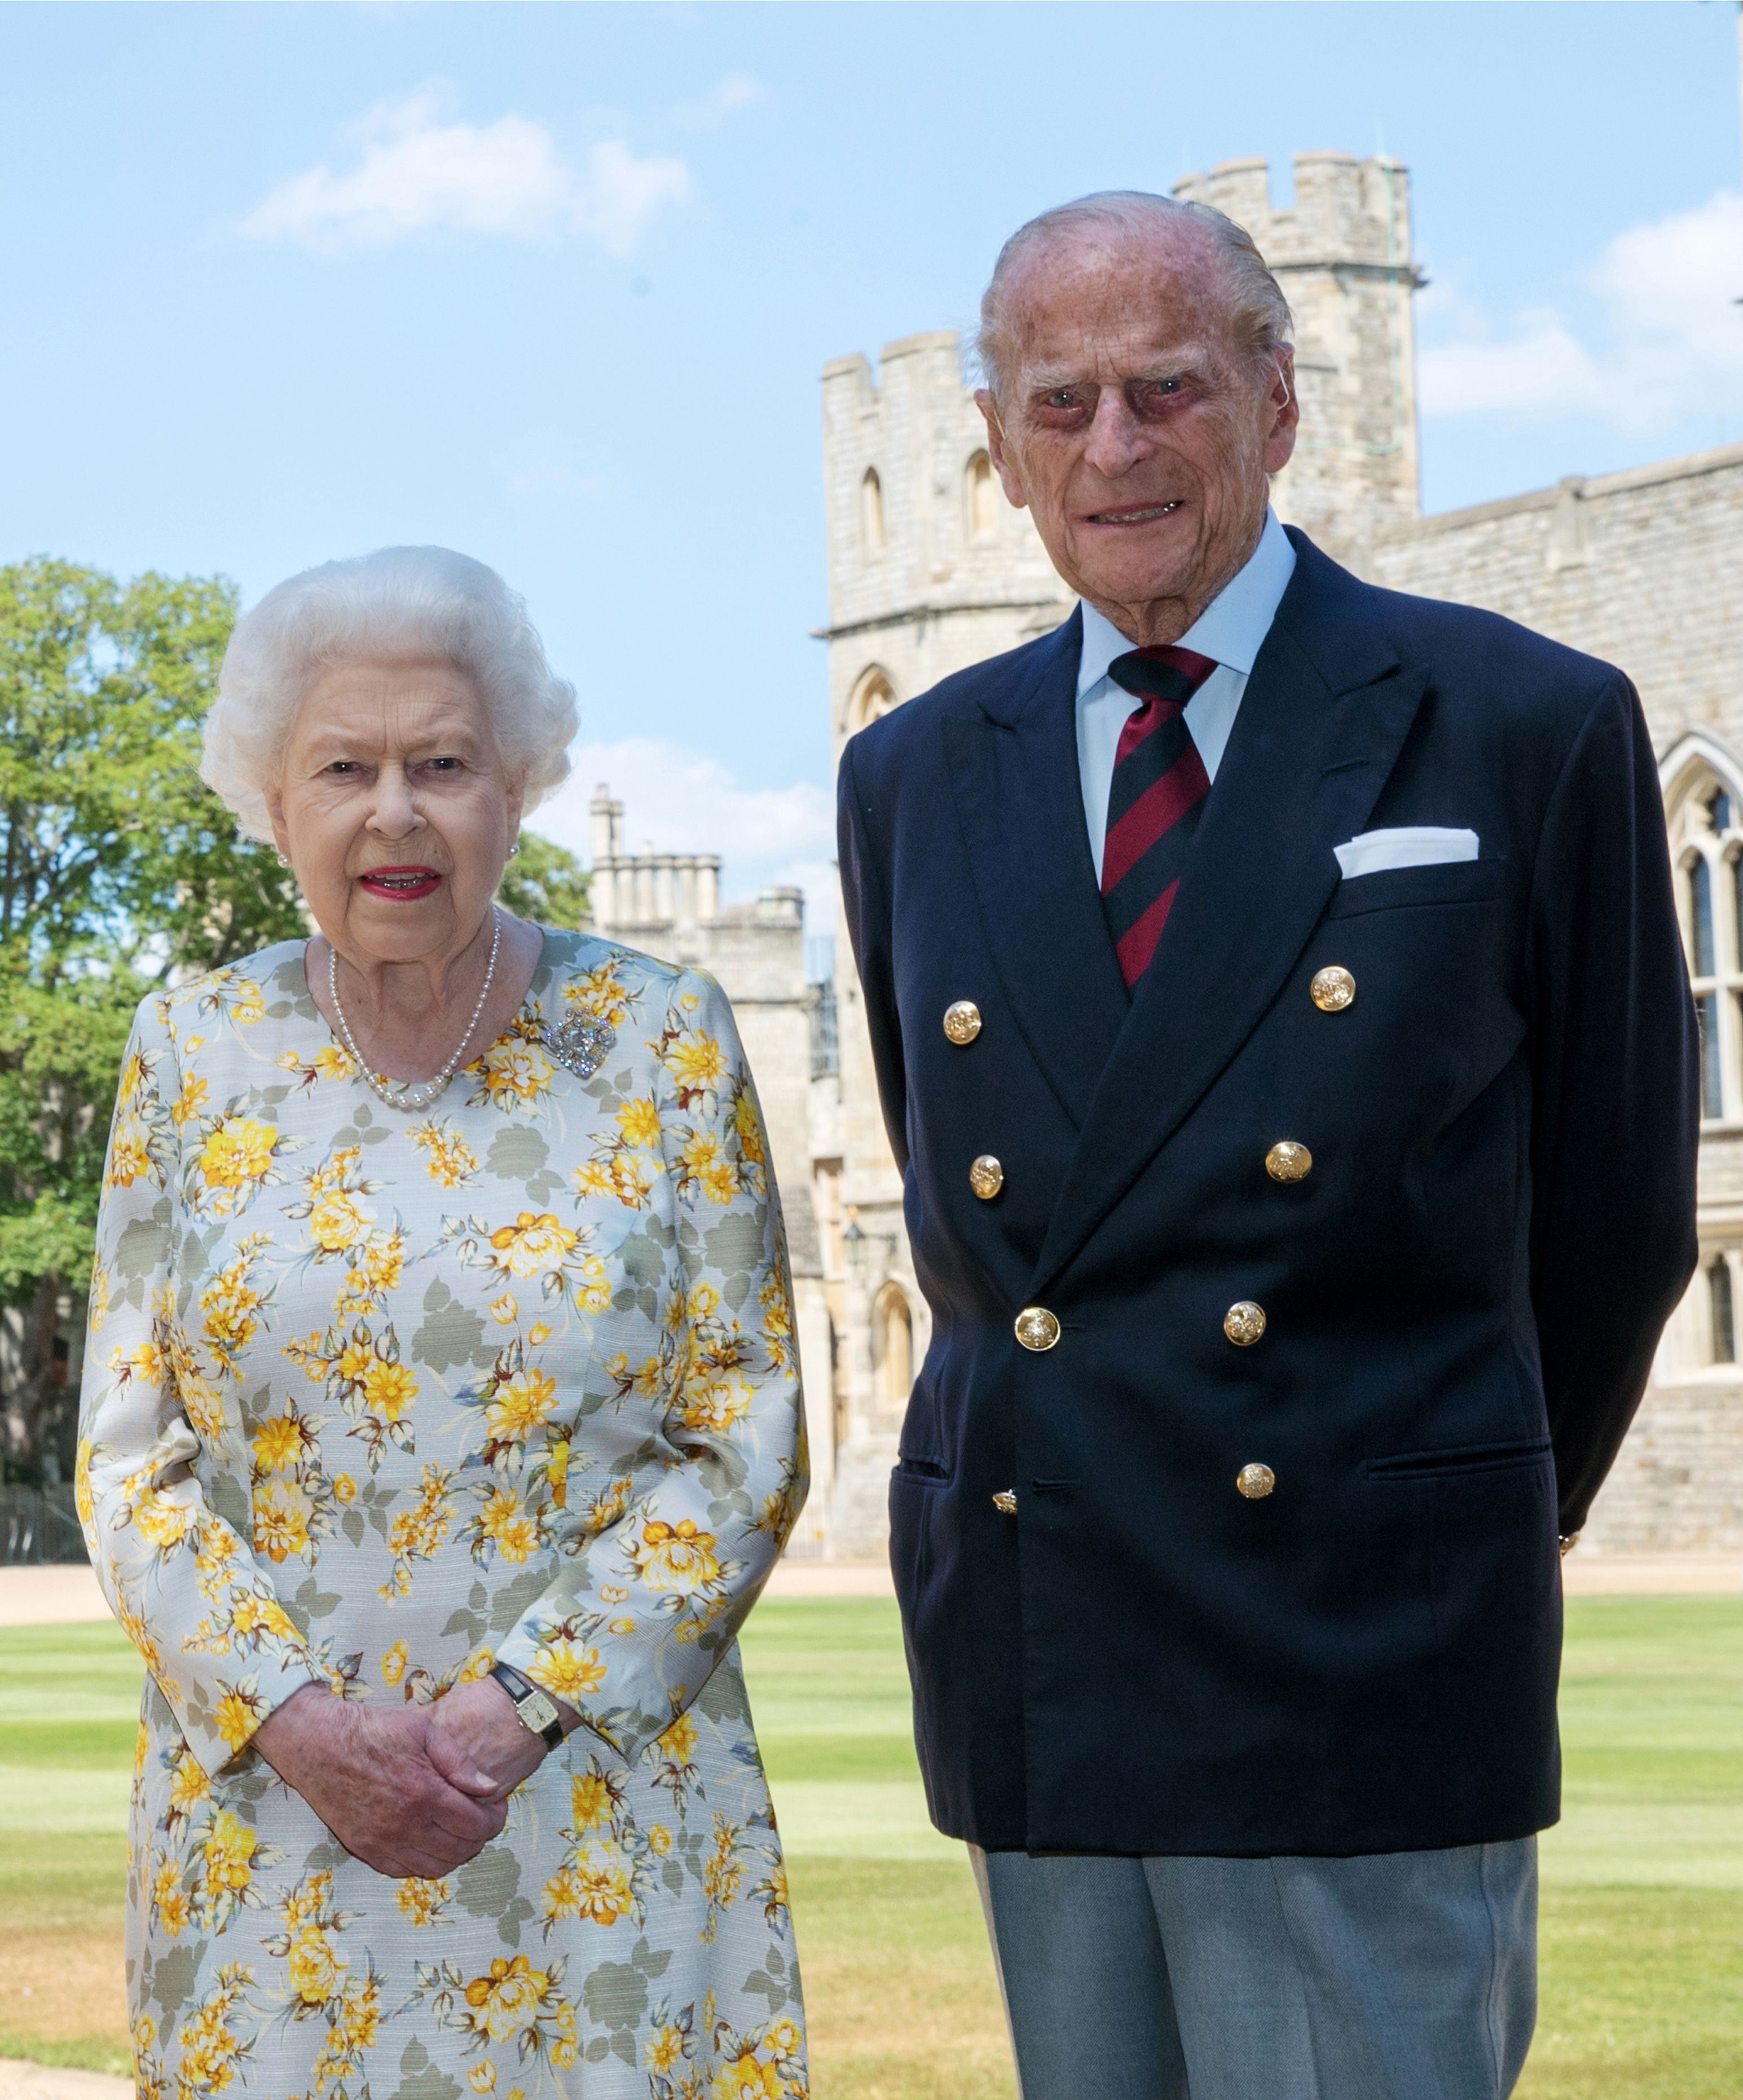 <p>After 73 years of marriage, Queen Elizabeth II became a widow when husband Prince Philip, Duke of Edinburgh <a href="https://www.wonderwall.com/celebrity/royals/prince-philip-remembered-hollywood-stars-royals-world-leaders-react-to-his-death-at-99-444563.gallery">passed away at 99</a> in April 2021. She herself <a href="https://www.wonderwall.com/celebrity/royals/best-photos-from-queen-elizabeth-ii-funeral-king-charles-princes-william-prince-harry-george-charlotte-kate-meghan652347.gallery">passed away</a> just 17 months later at 96.</p>